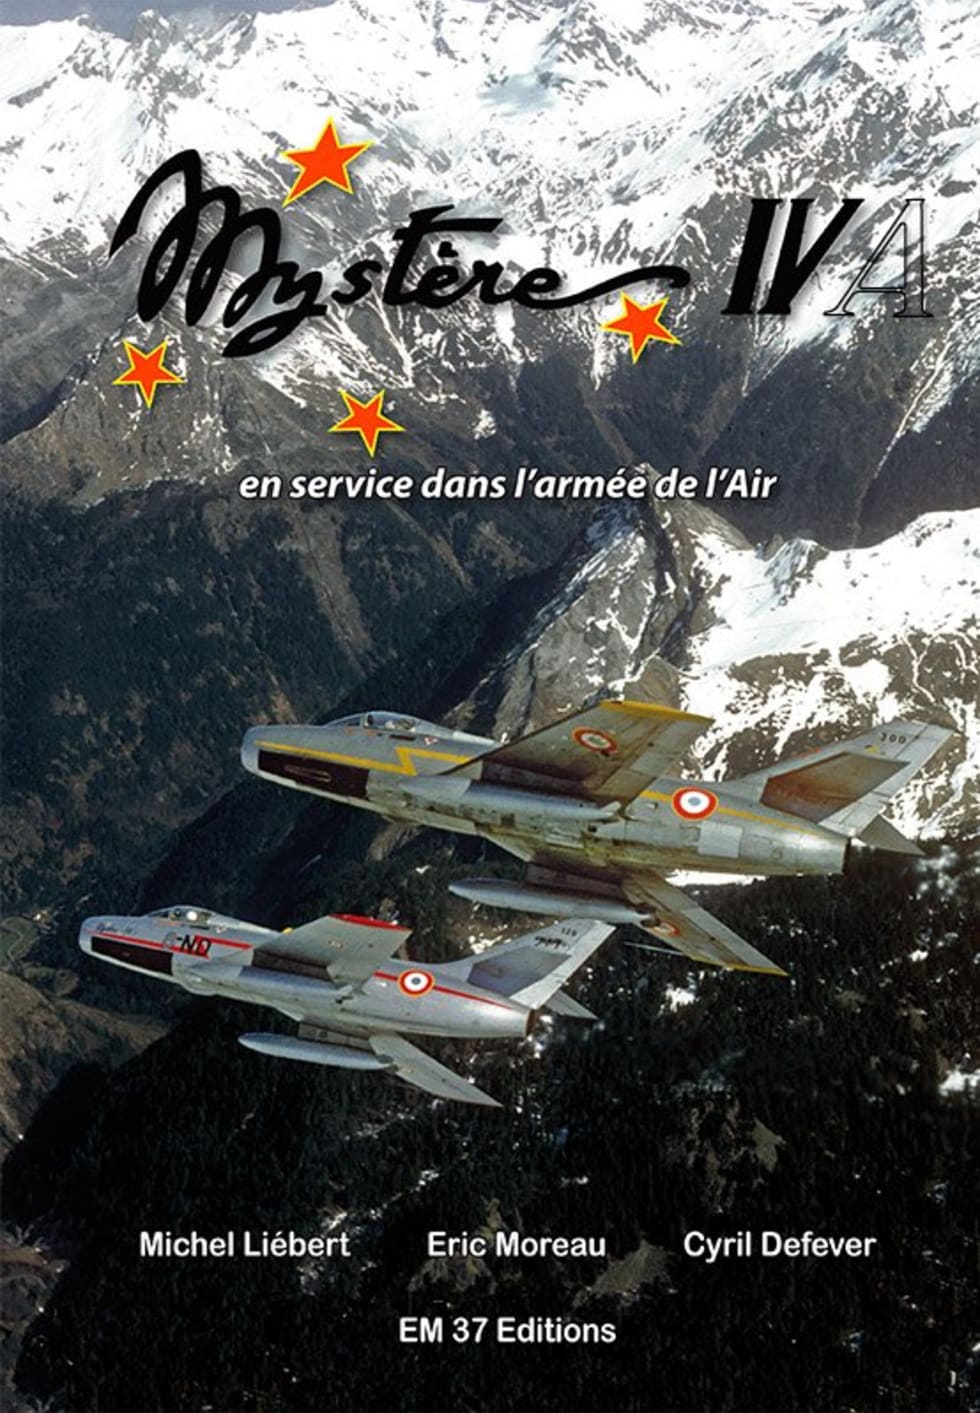 Bookcover of the Mystere IVA